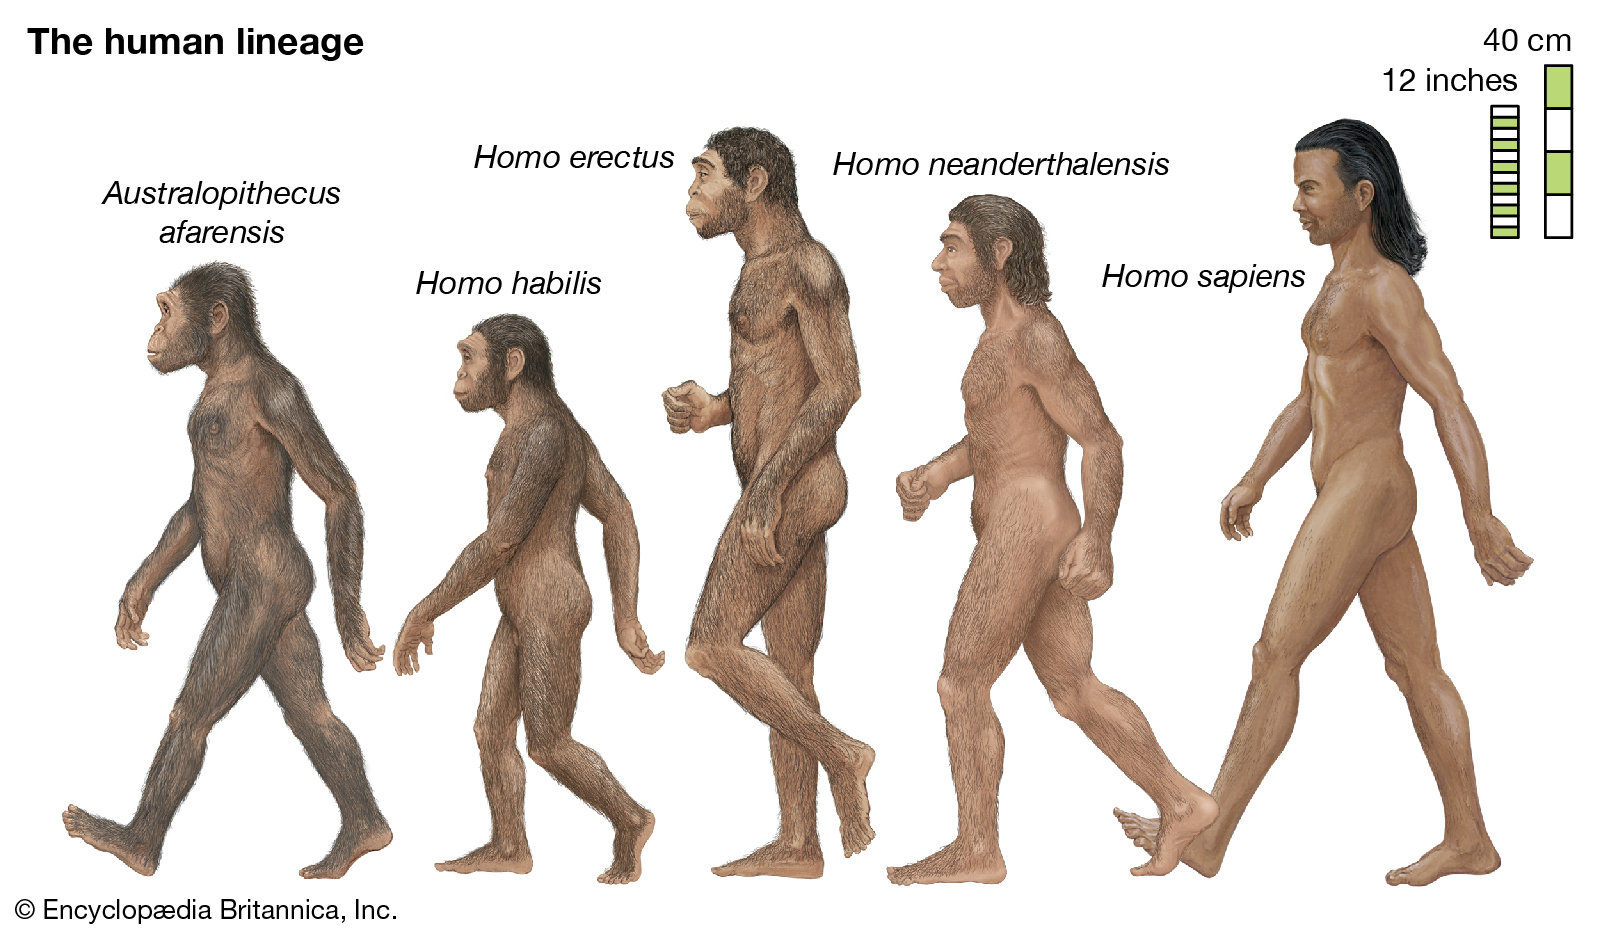 When did Hominins become human?